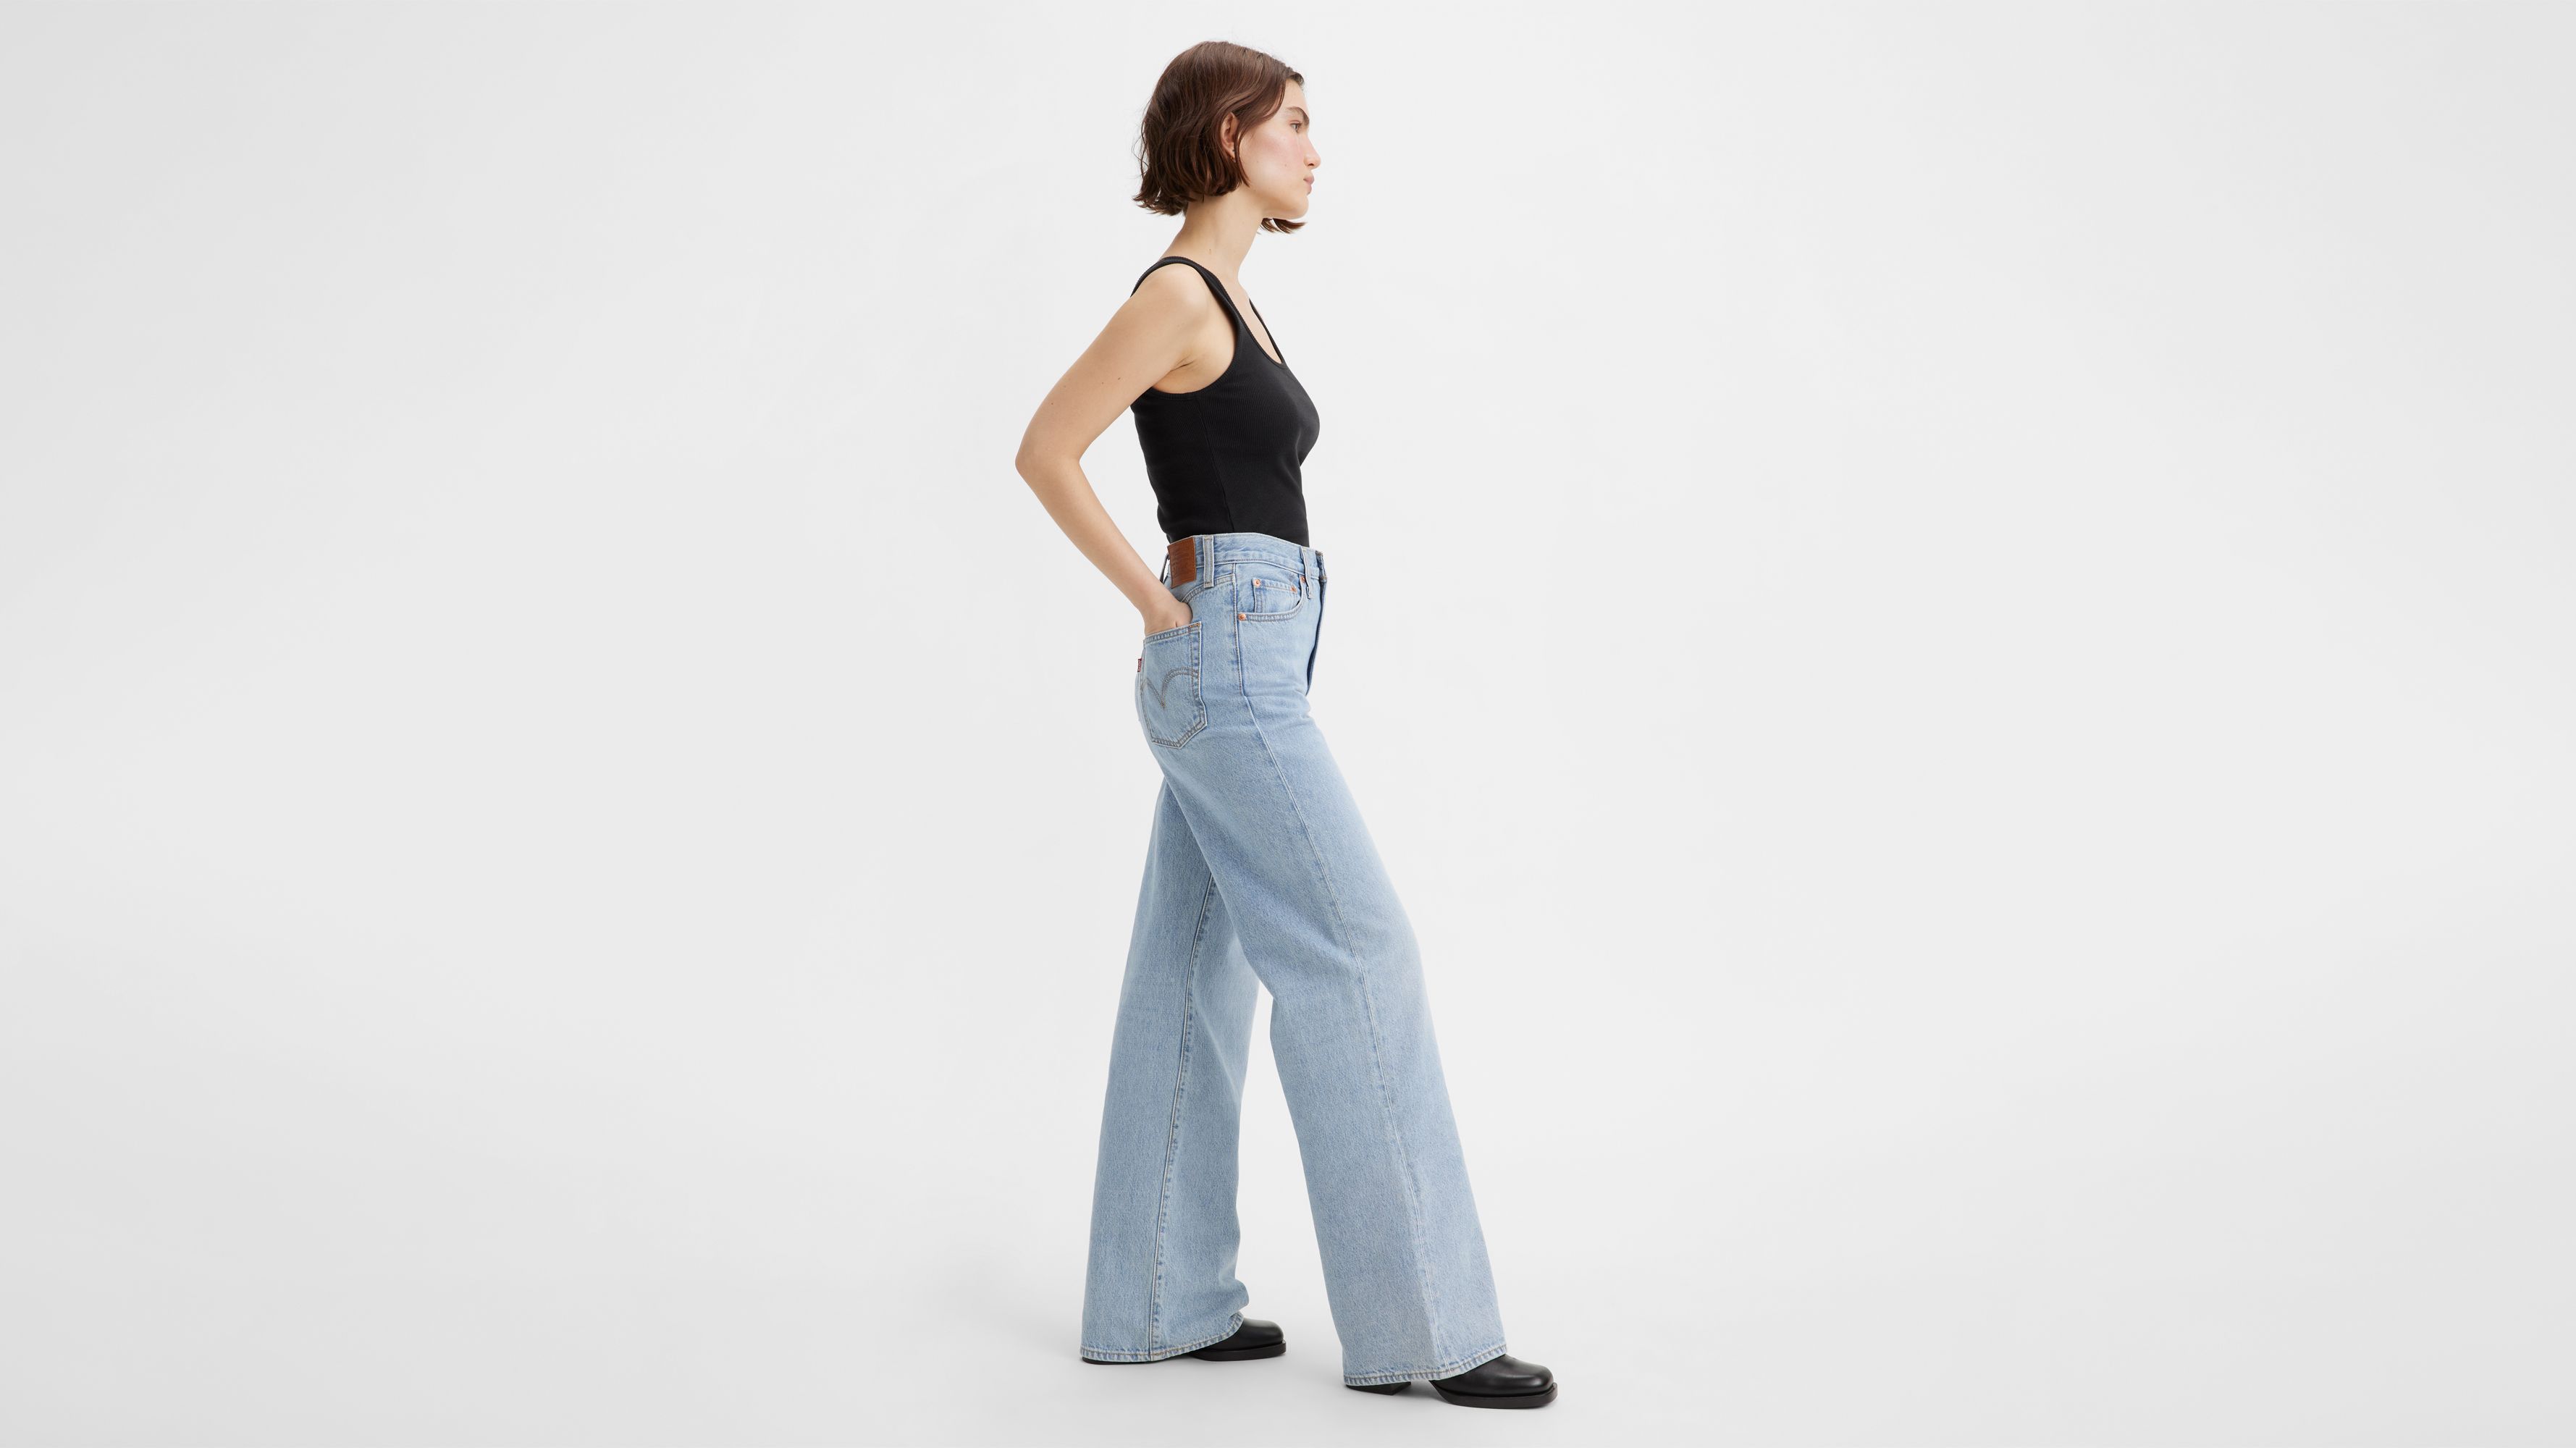 Levi's Ribcage wide leg jeans in navy blue